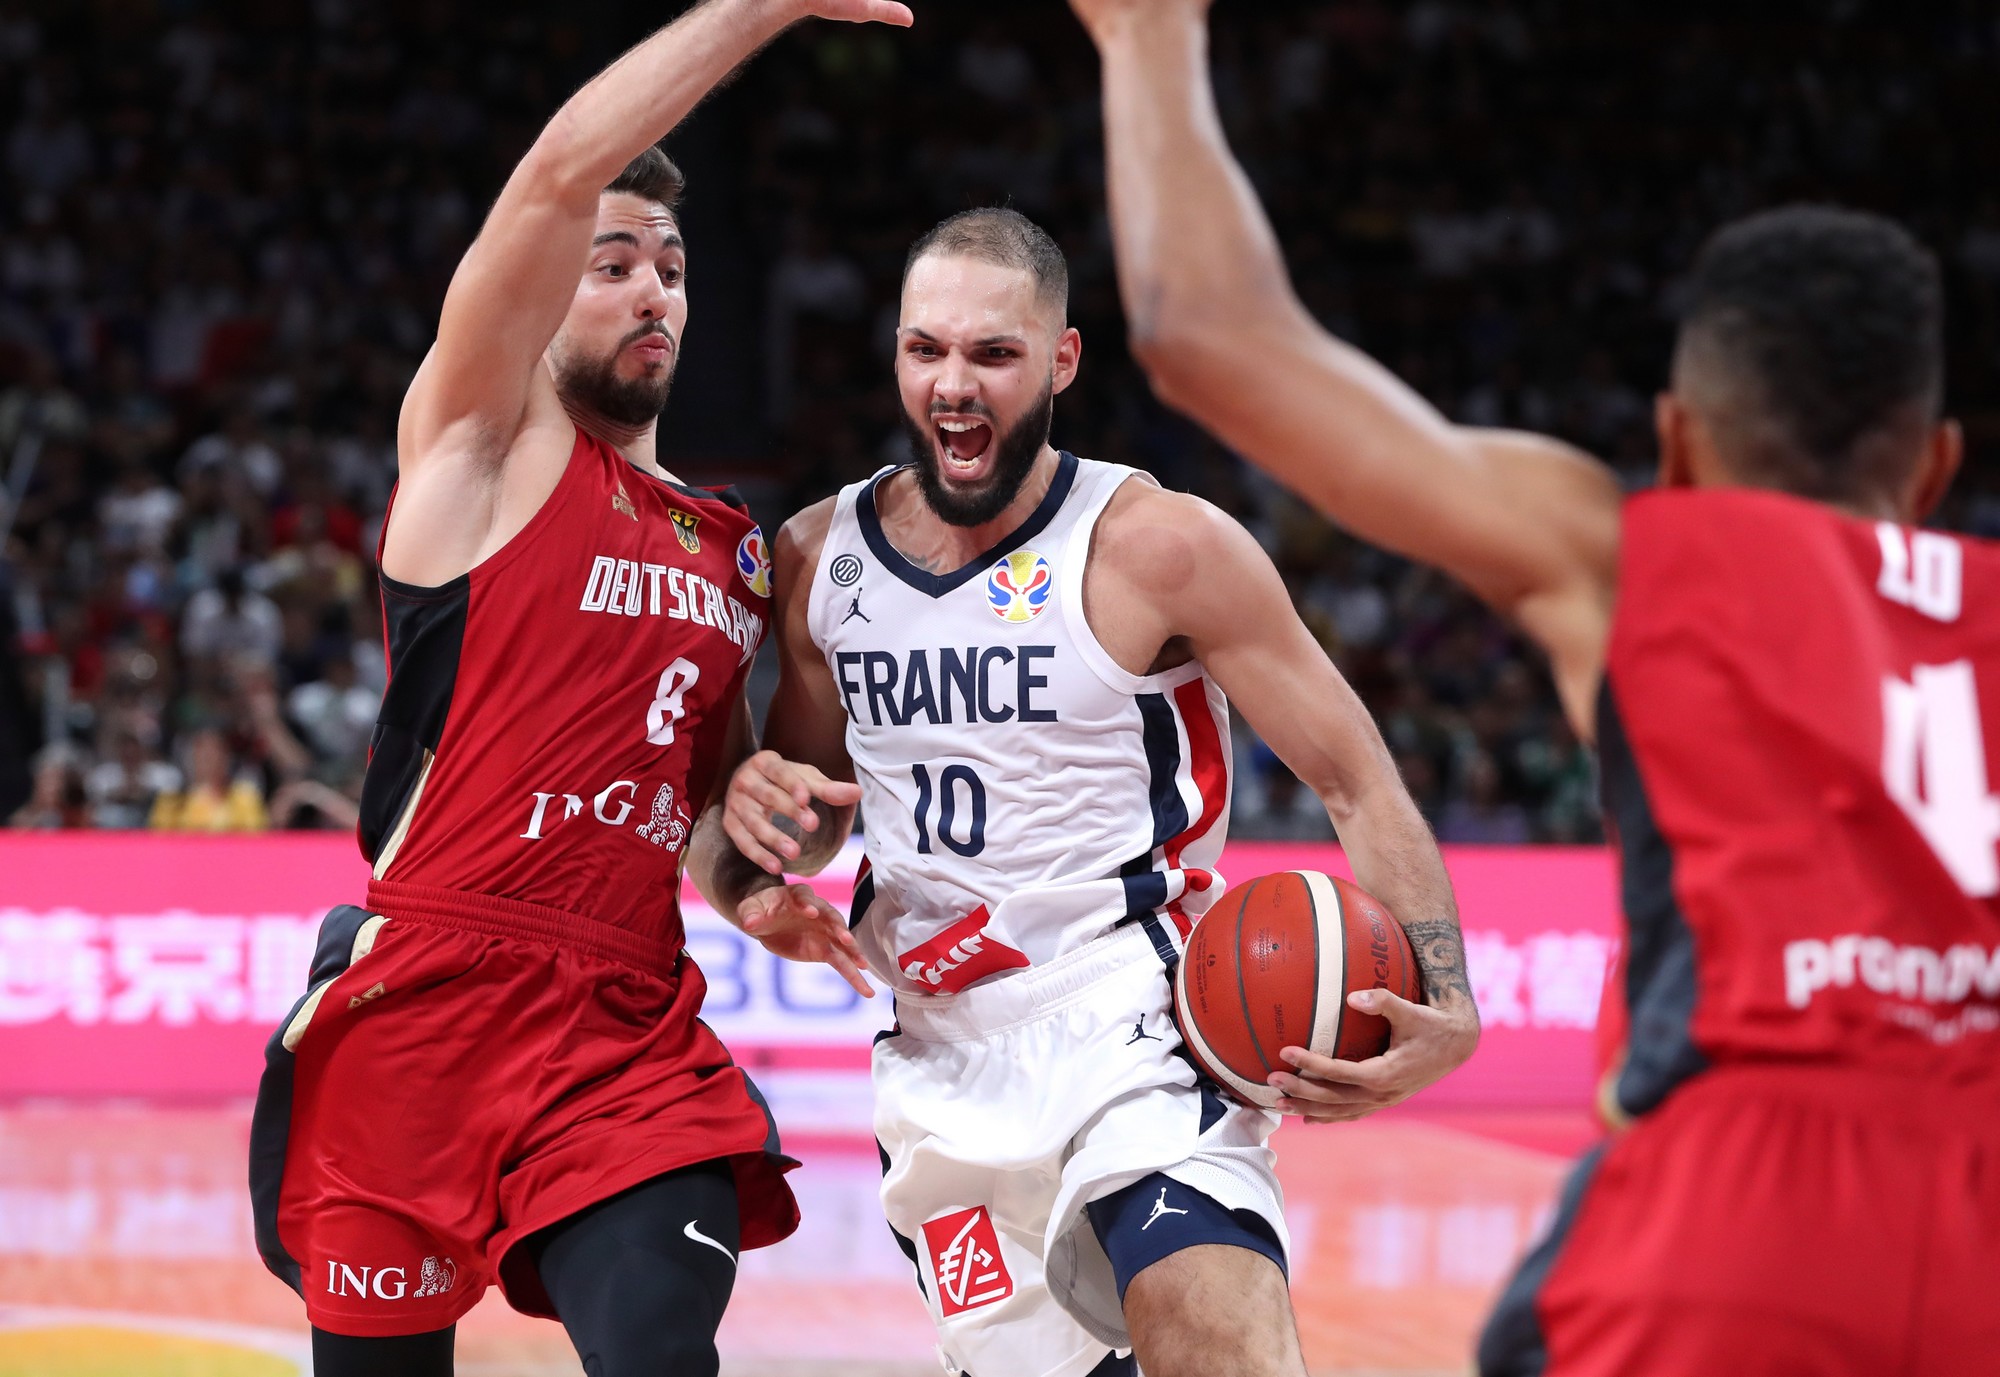 Basketball - FIBA World Cup - First Round - Group G - France v Germany - Shenzhen Bay Sports Center, Shenzhen, China - September 1, 2019 France's Evan Fournier in action with Germany's Ismet Akpinar REUTERS/Athit Perawongmetha